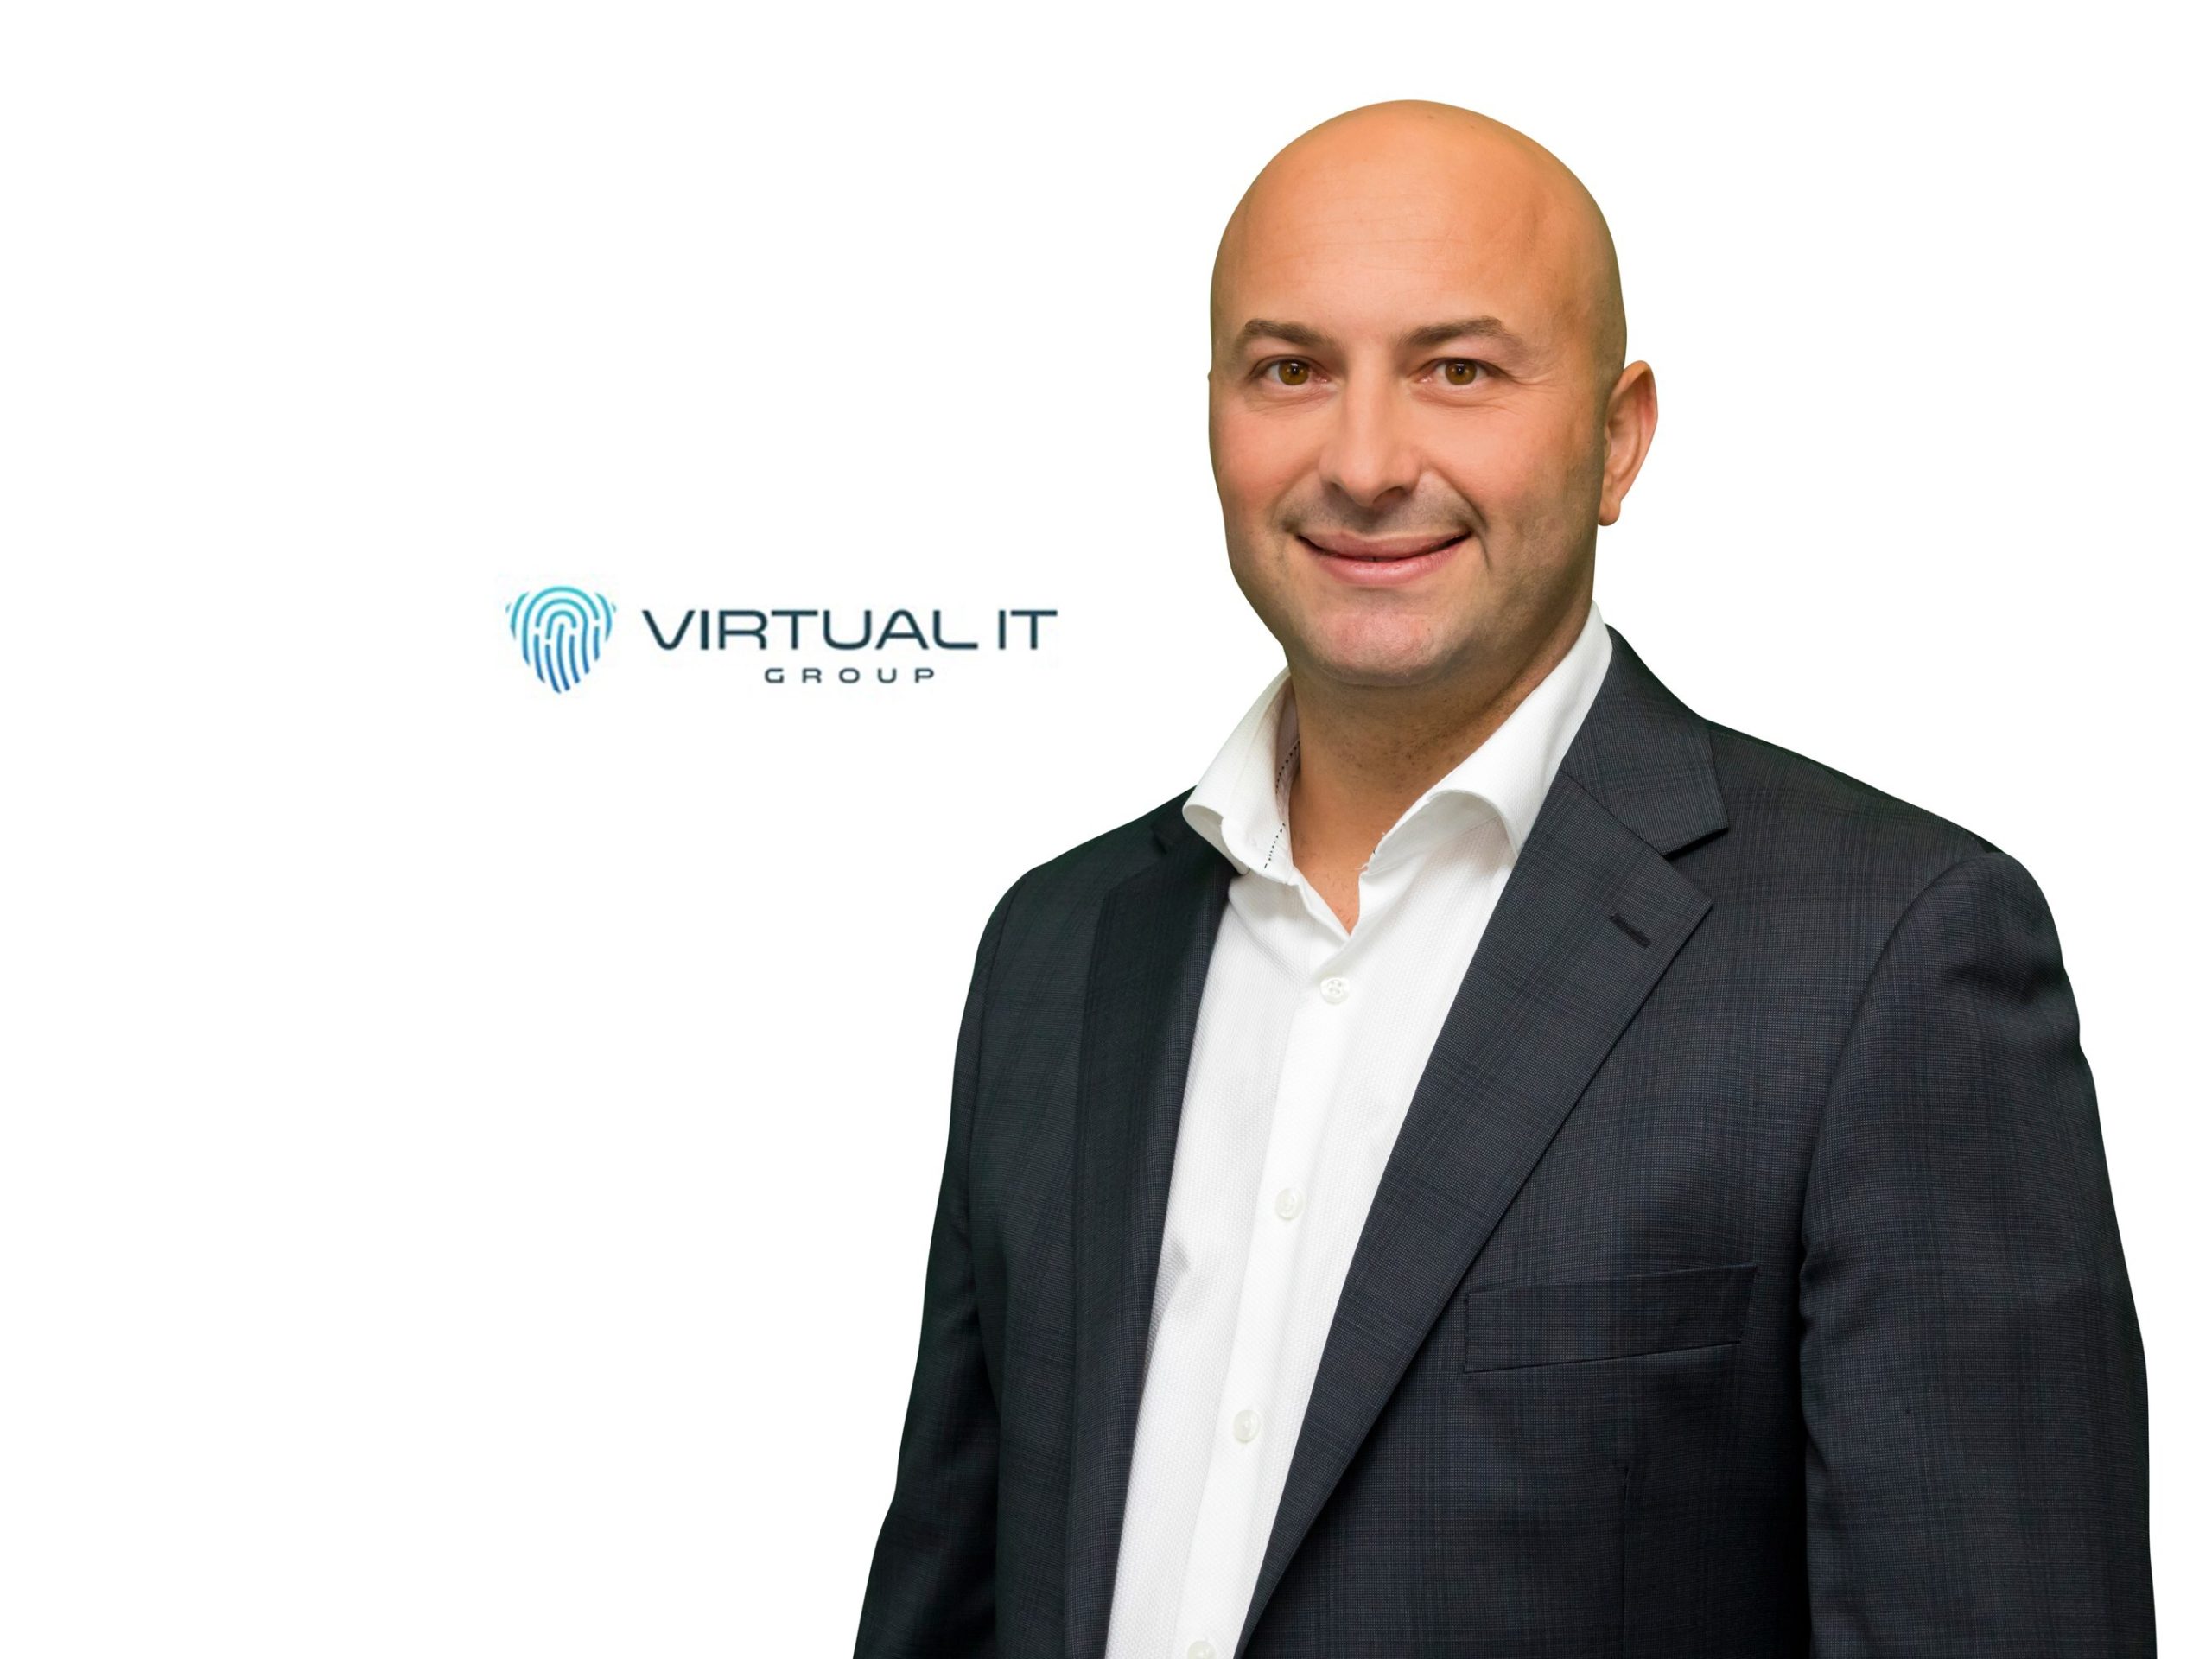 Virtual IT Group and The Riverside Company investment partnership.